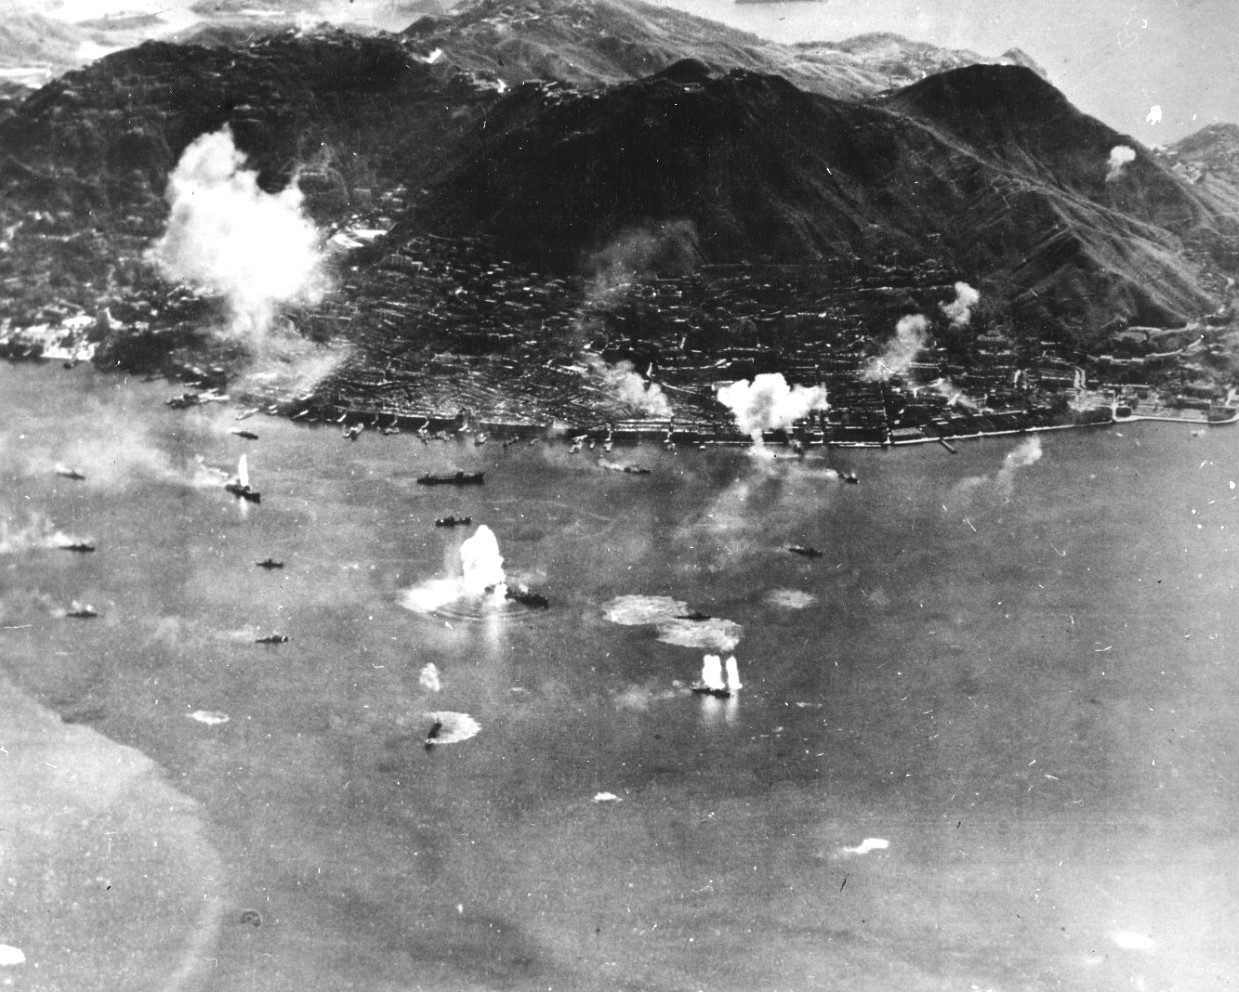 The port of Honk Kong under attack by American planes from Task Force 38, 16 Jan 1945, while Task Force 38 was still in the South China Sea.